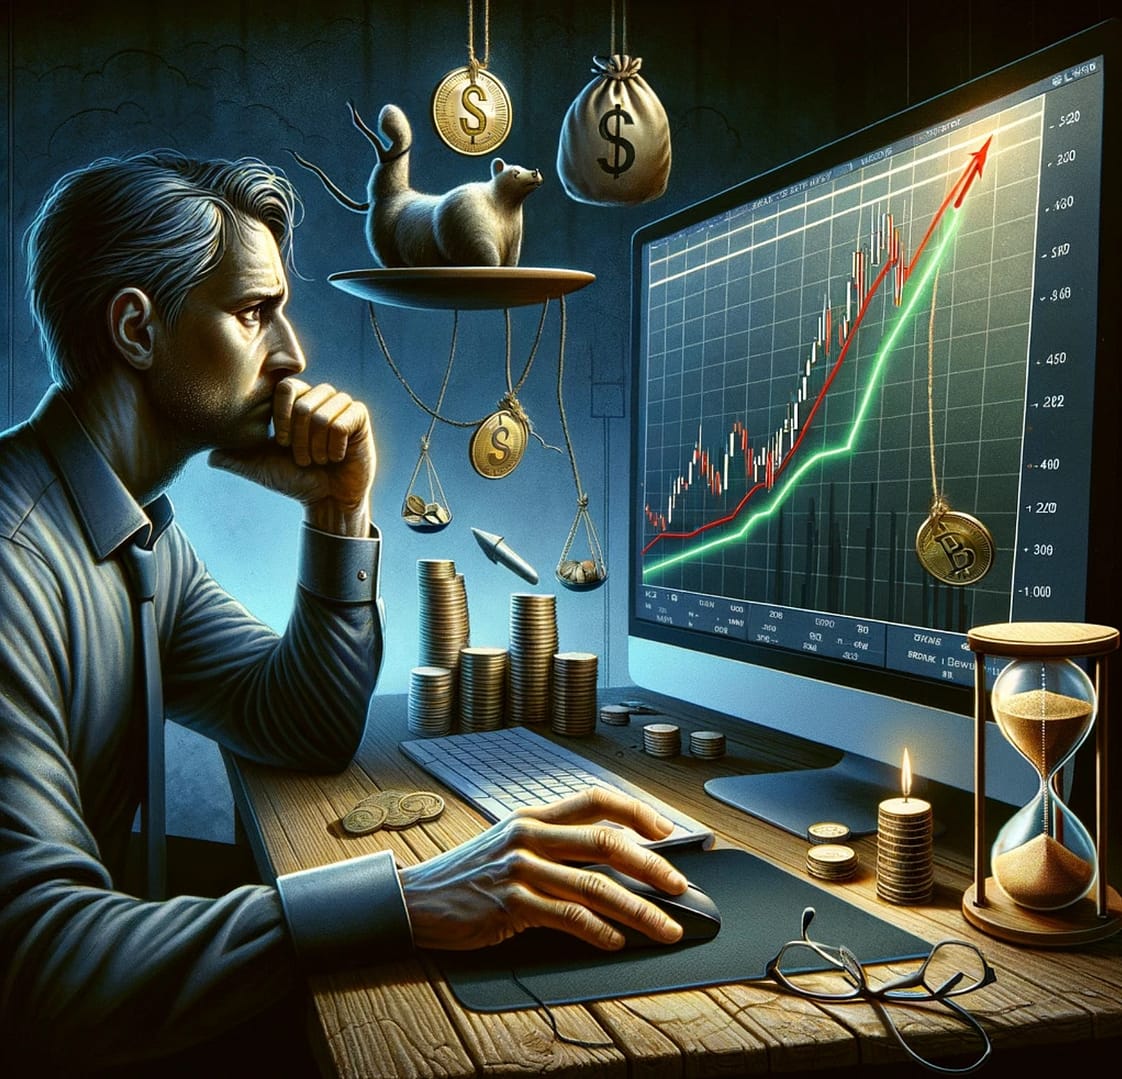 This illustration portrays the fear of letting a profit turn into a loss in trading, capturing the trader's tension and the emotional dilemma faced in such situations.